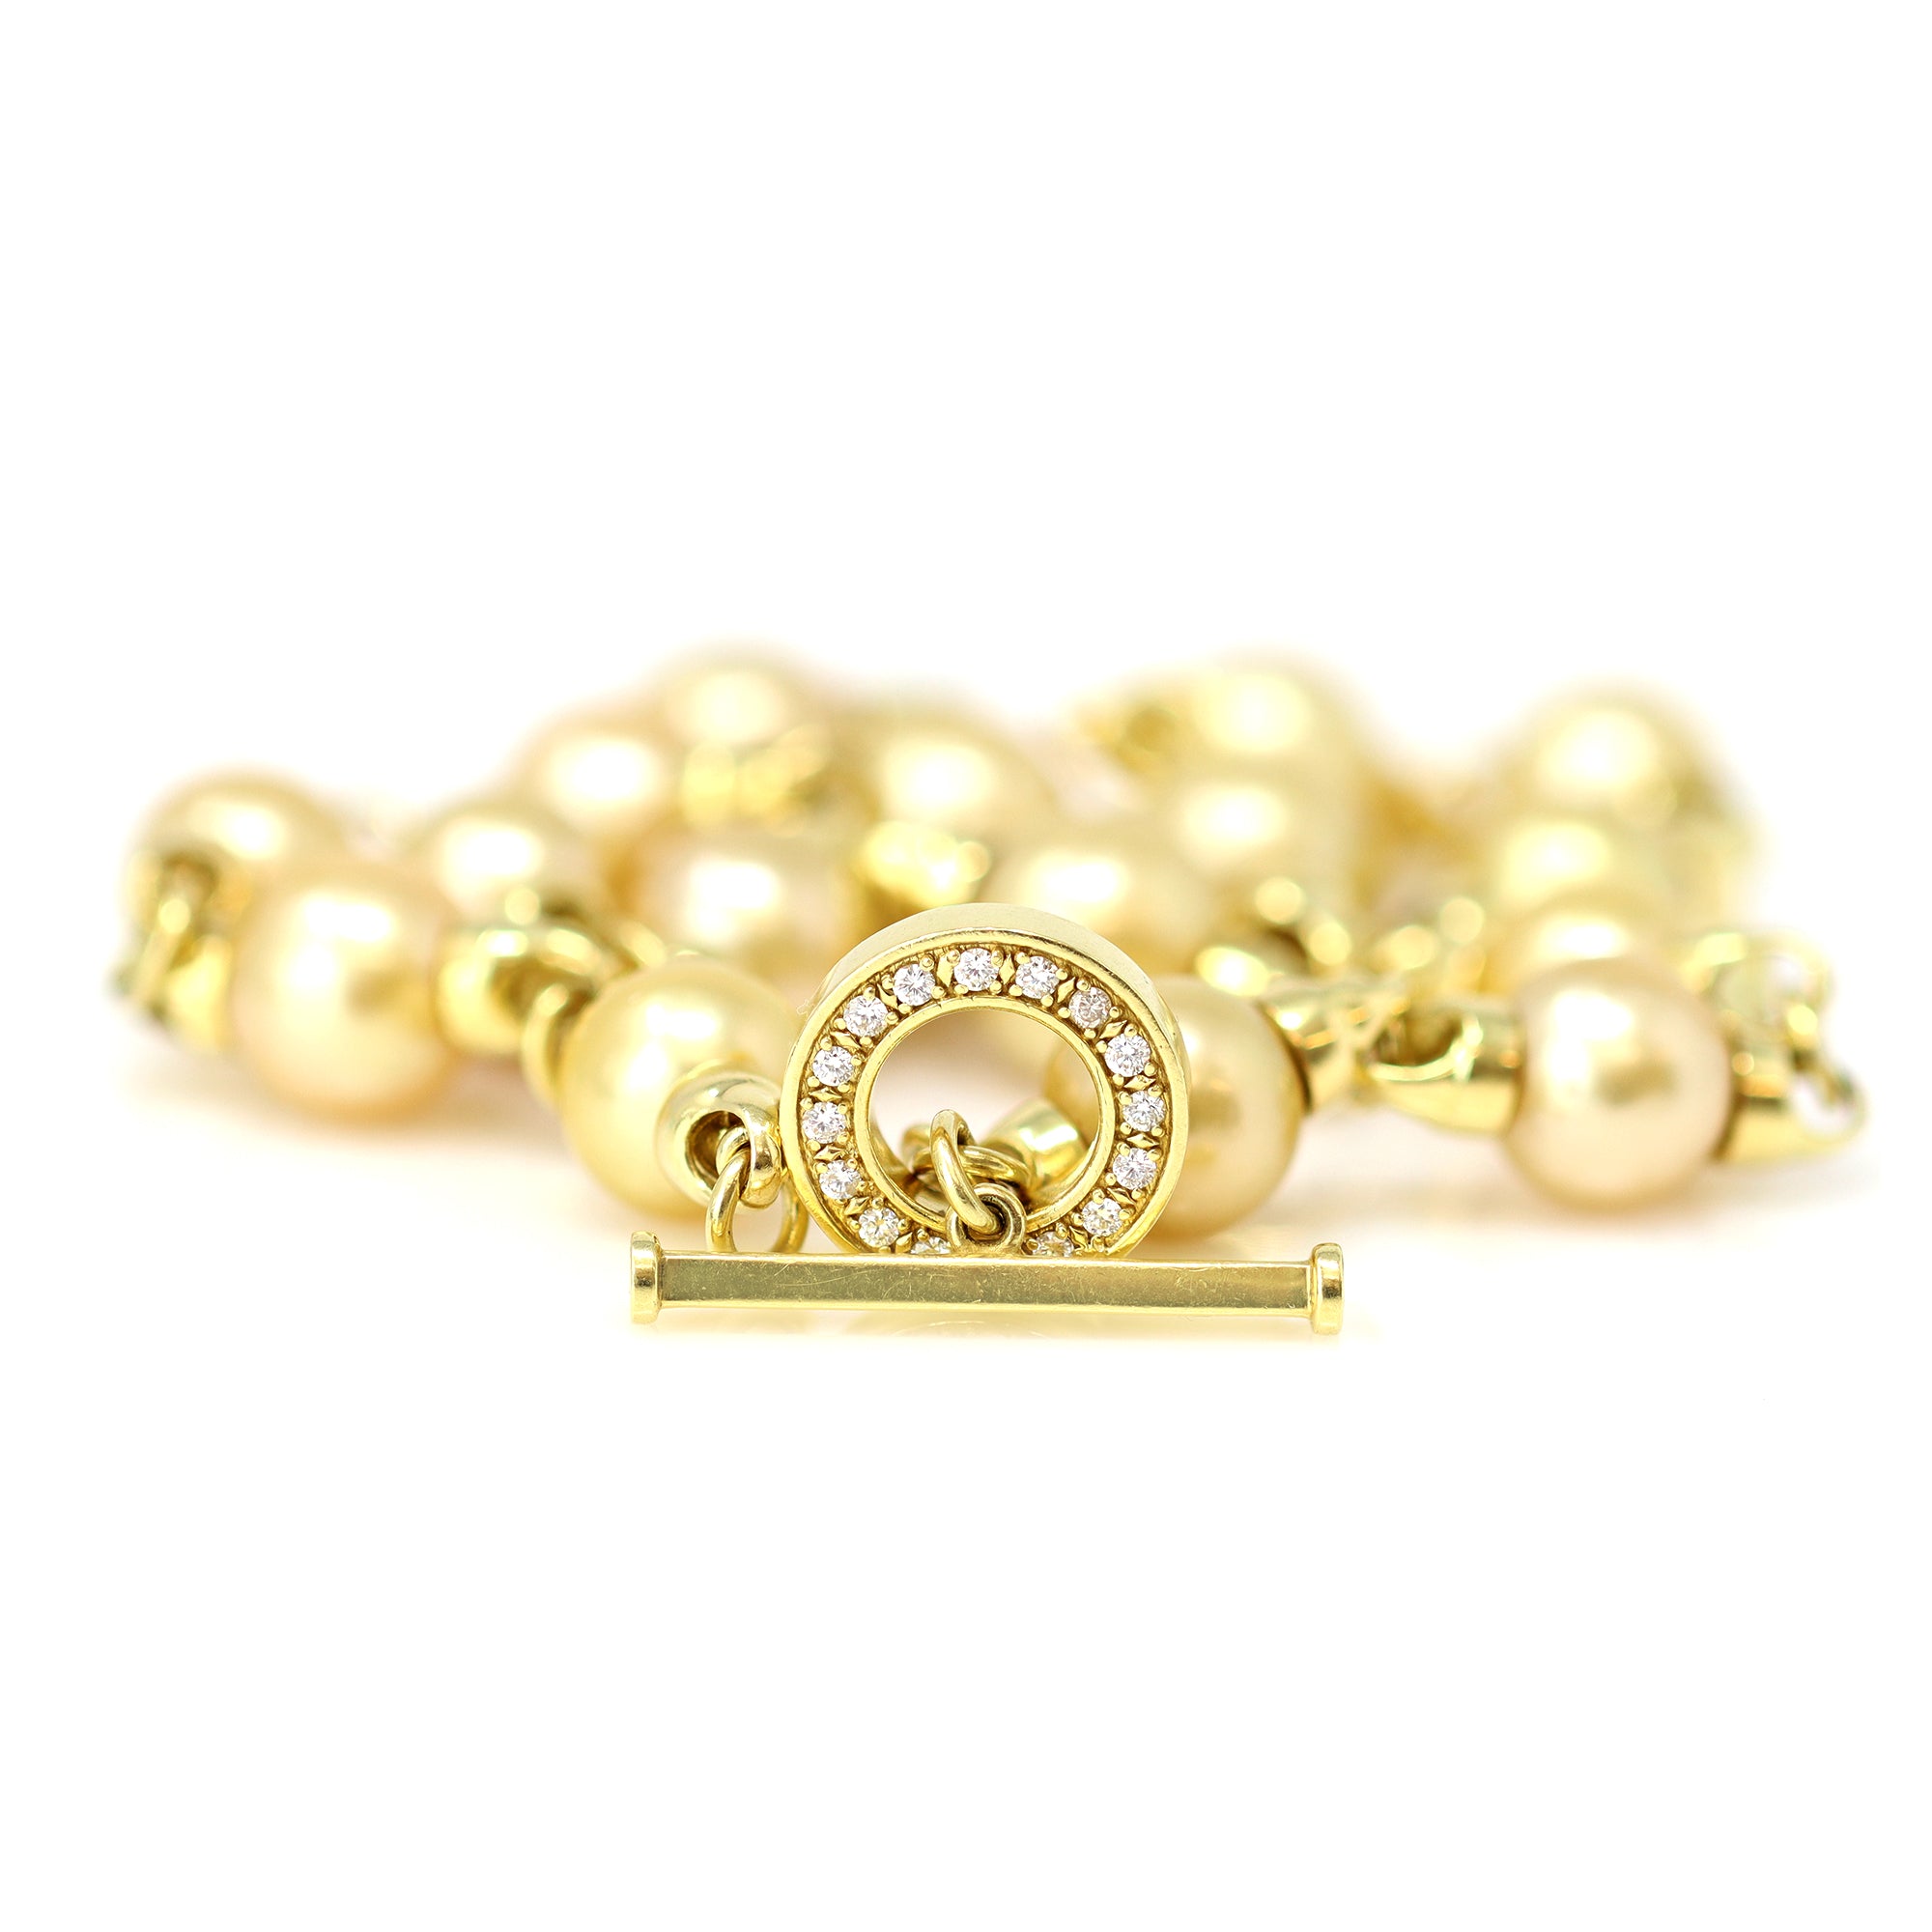 Natural Gold South-Sea Pearl Necklace with Diamond Clasp - ROSARIA VARRA  FINE JEWELRY